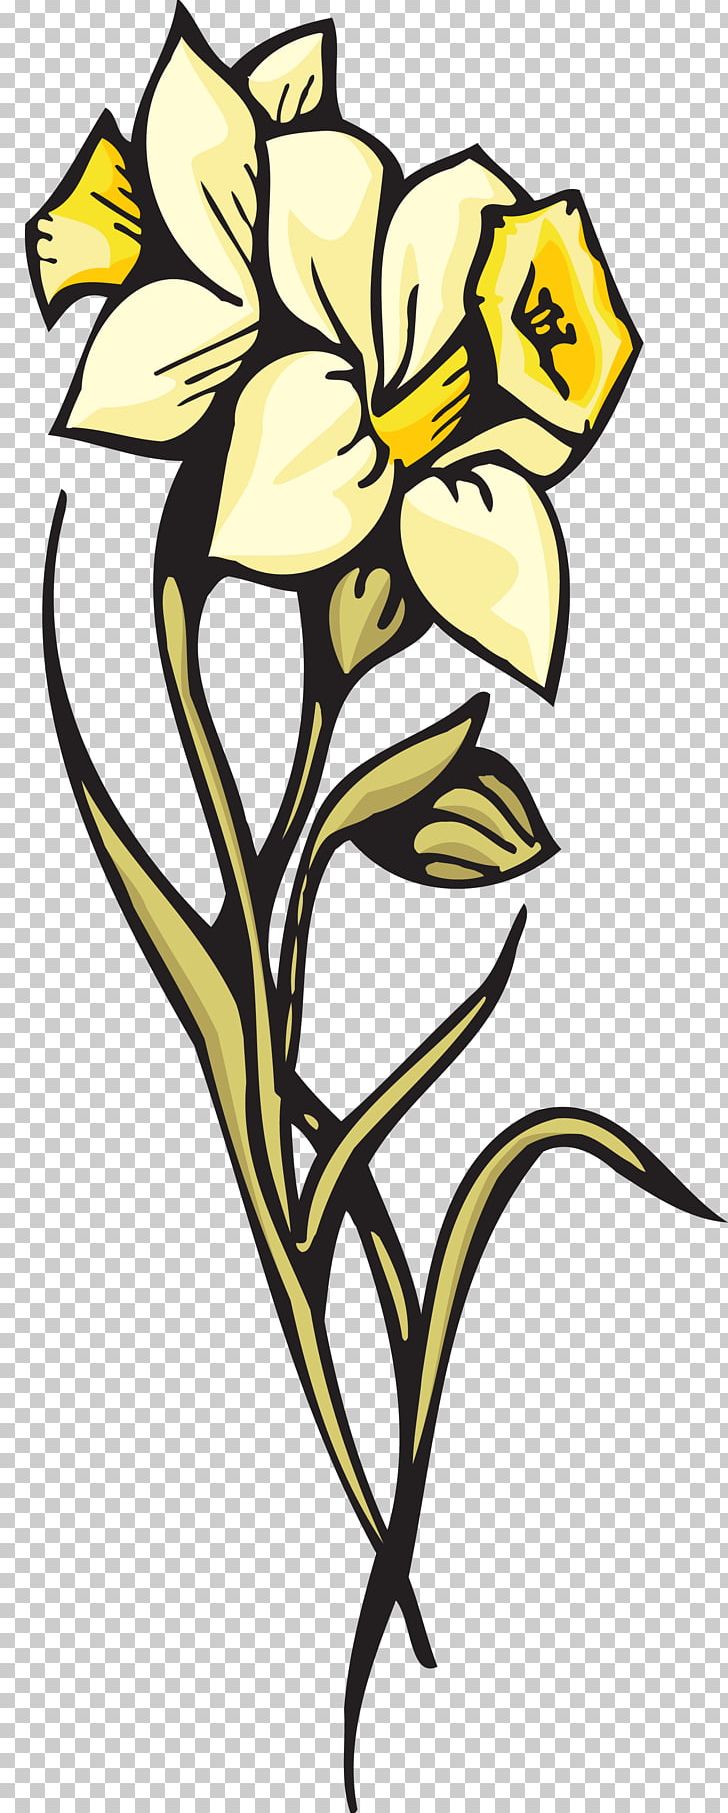 Floral Design Cut Flowers Tulip PNG, Clipart, Art, Artwork, Black And White, Cut Flowers, Daffodil Free PNG Download